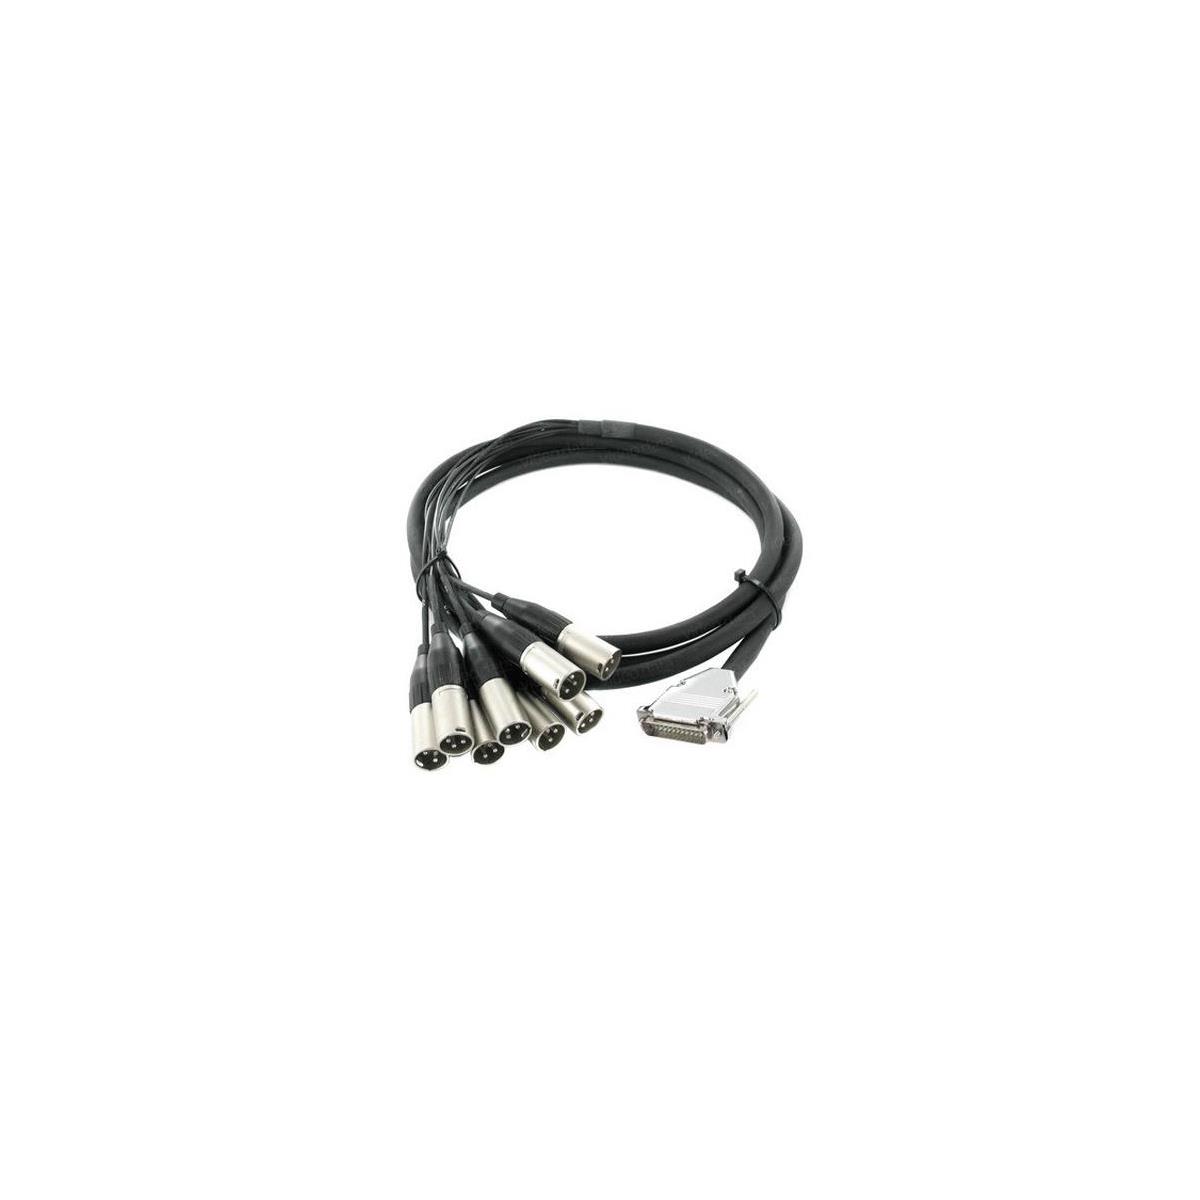 Image of Cymatic Audio Cable Splitter for uTrack24 Recorder - DB25 to 8 XLR Female